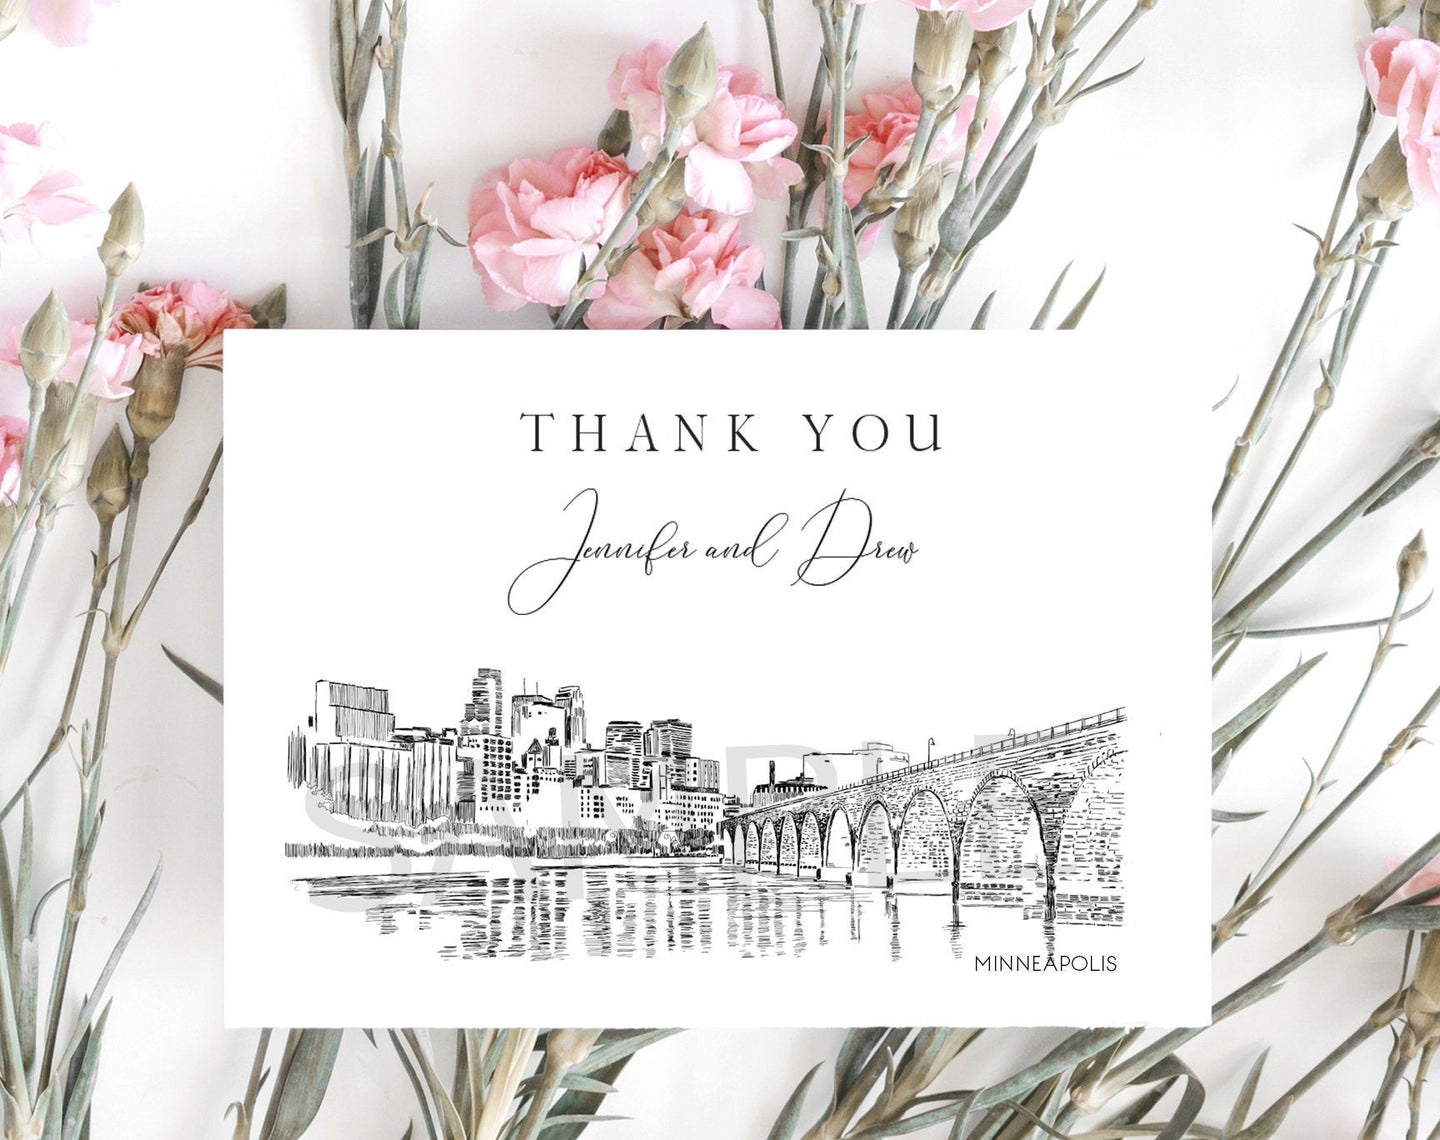 Minneapolis Skyline Thank You Cards, minneapolis, TY Cards, Personal Note Cards, Bridal Shower, Thank you Notes (set of 25 cards)